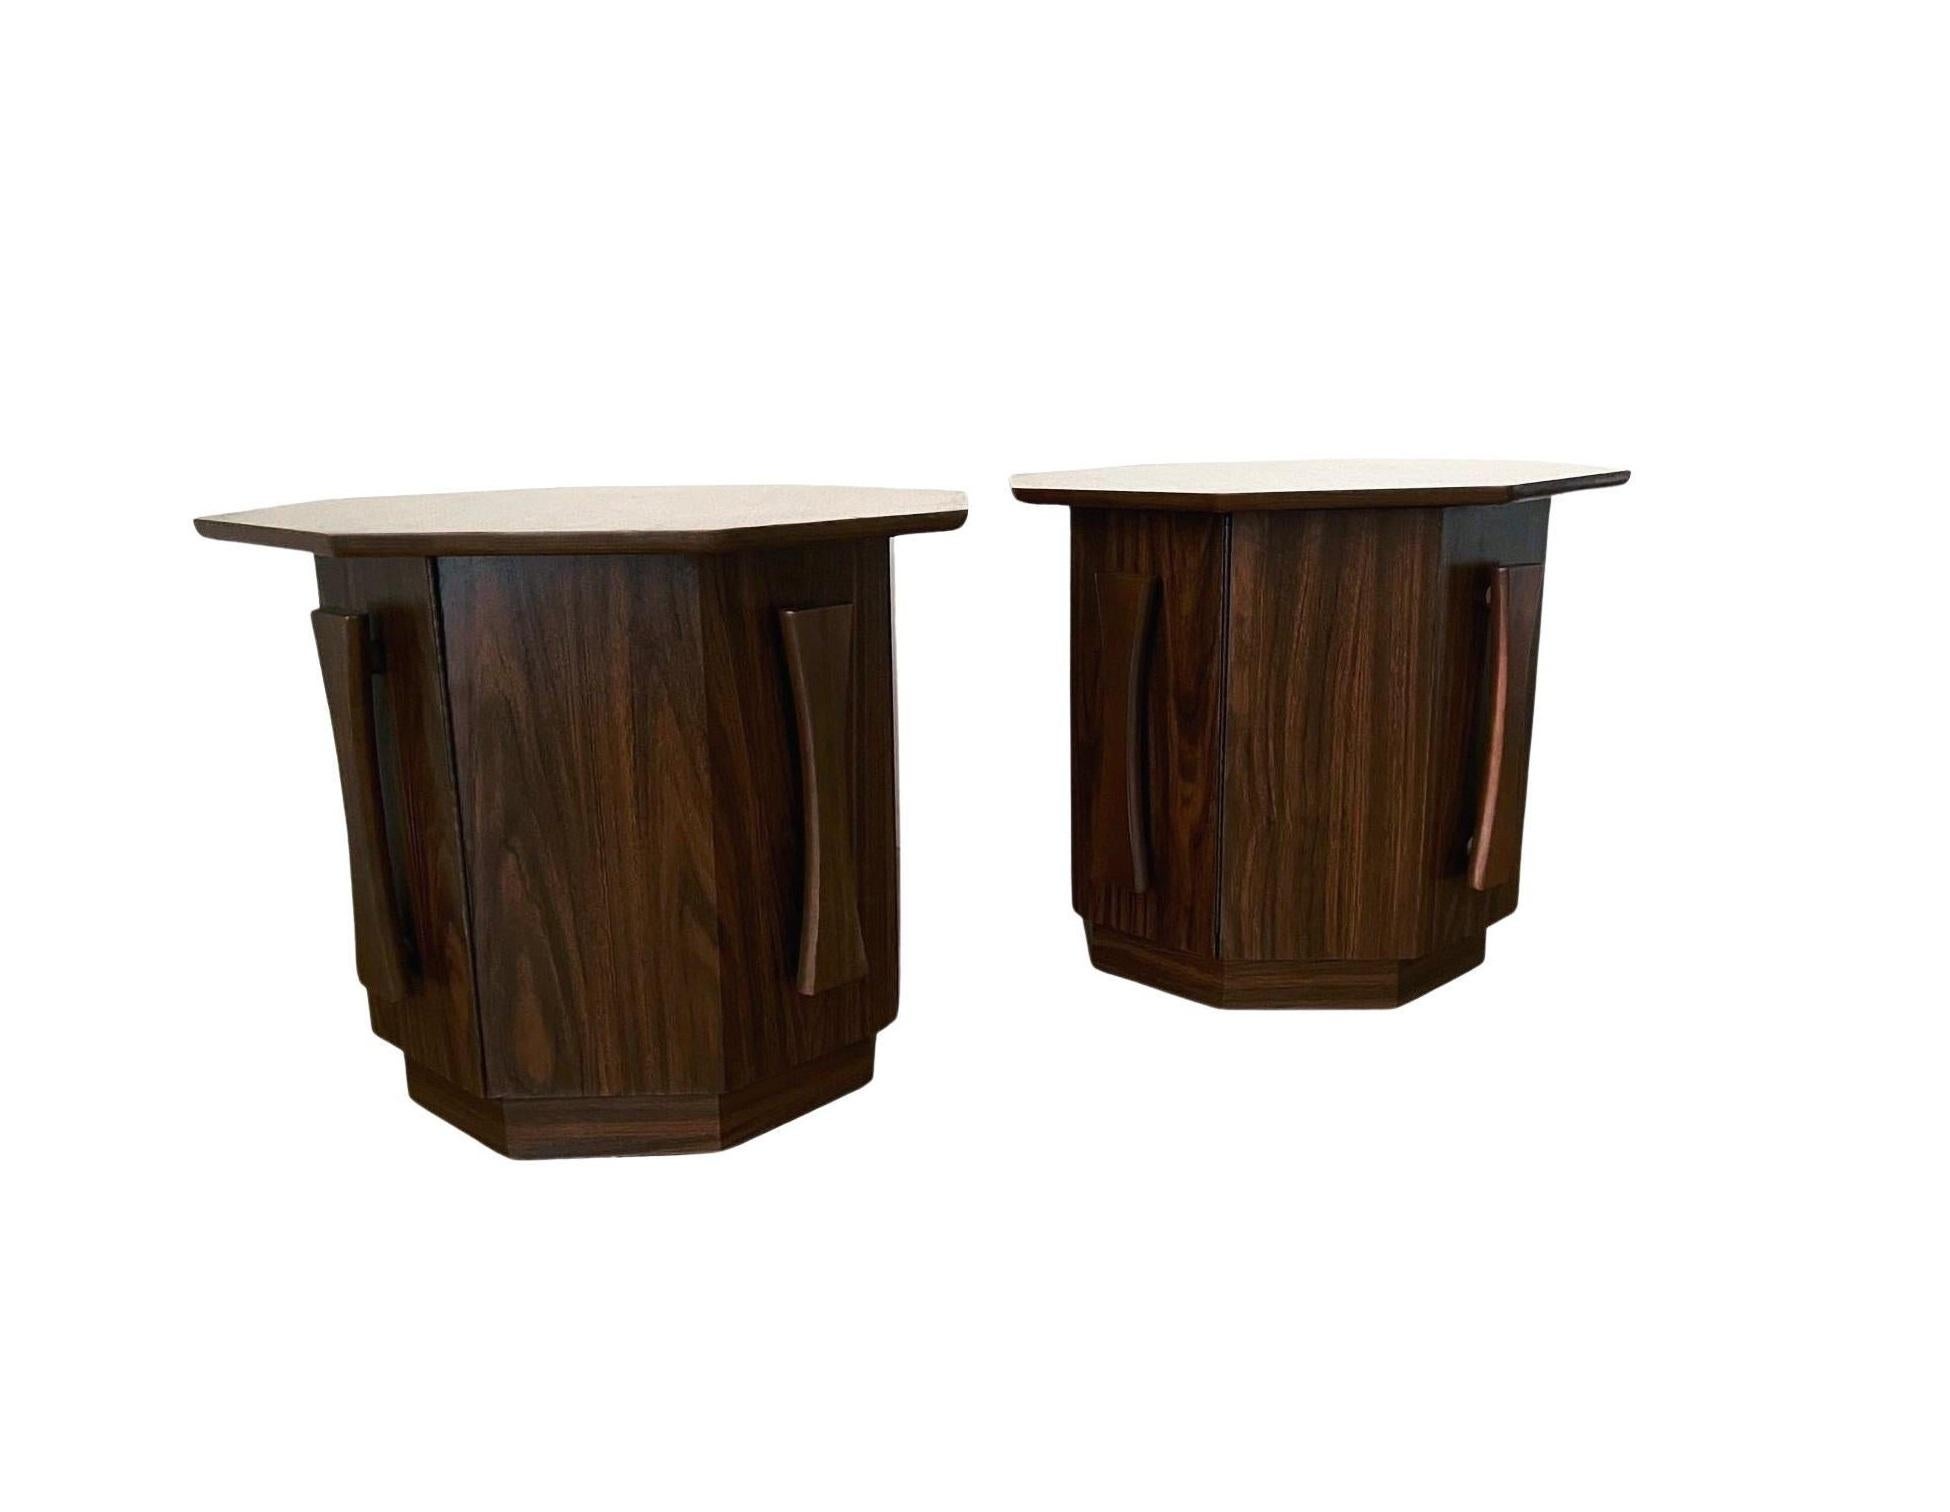 Influenced by Paul Evans’ Brutalist-inspired designs, this stunningly beautiful matching pair of end/bedside tables truly stands out. Each perfectly proportioned cabinet with distinctive eight-sided octagonal form is supported by a recessed plinth